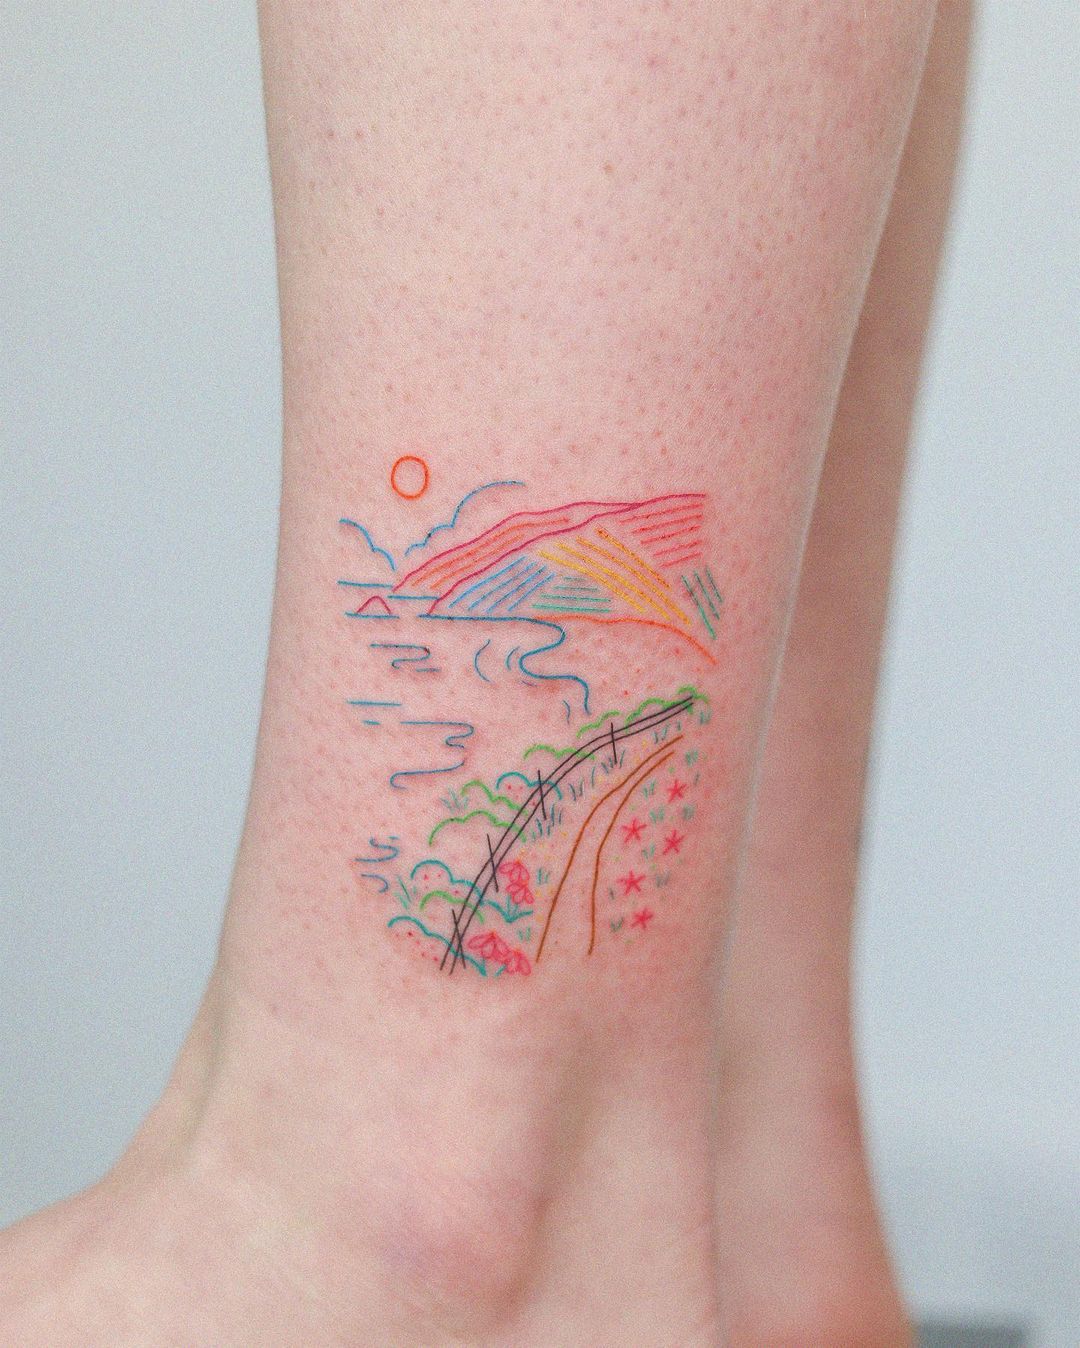 Simple mountain tattoo by notsoevil.ink